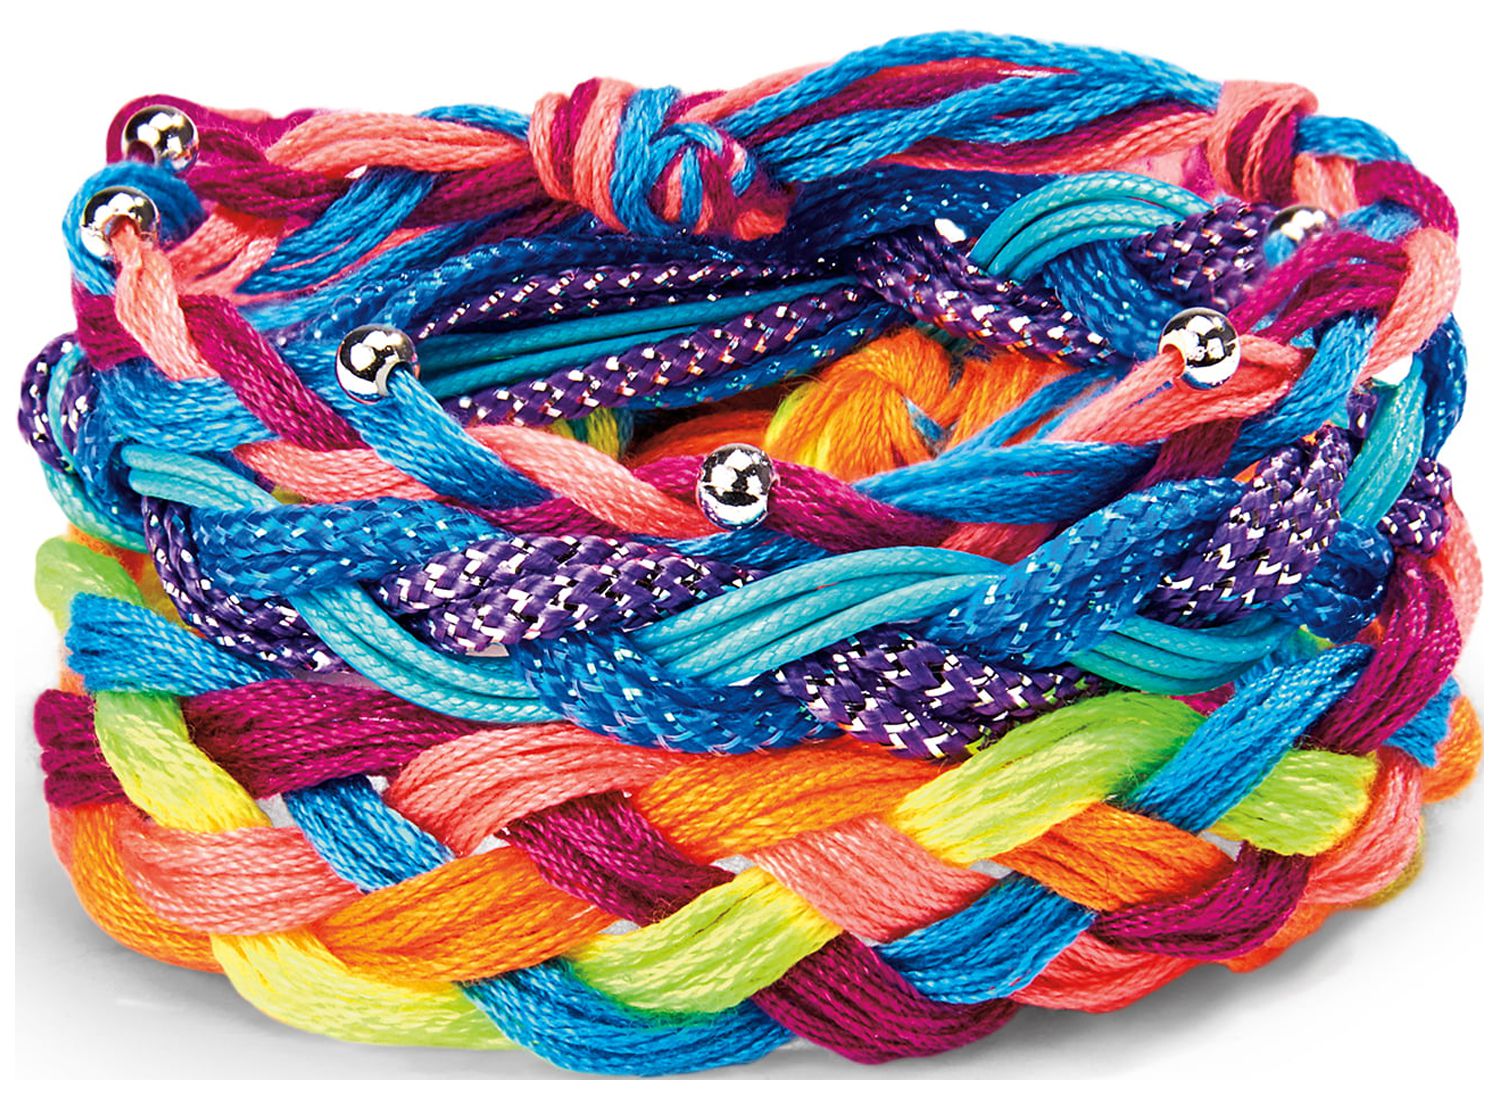 Cra-Z-Art Be Inspired 5-in-1 Friendship Bracelet Studio for Girls 6 Years of Age and Older - image 11 of 13